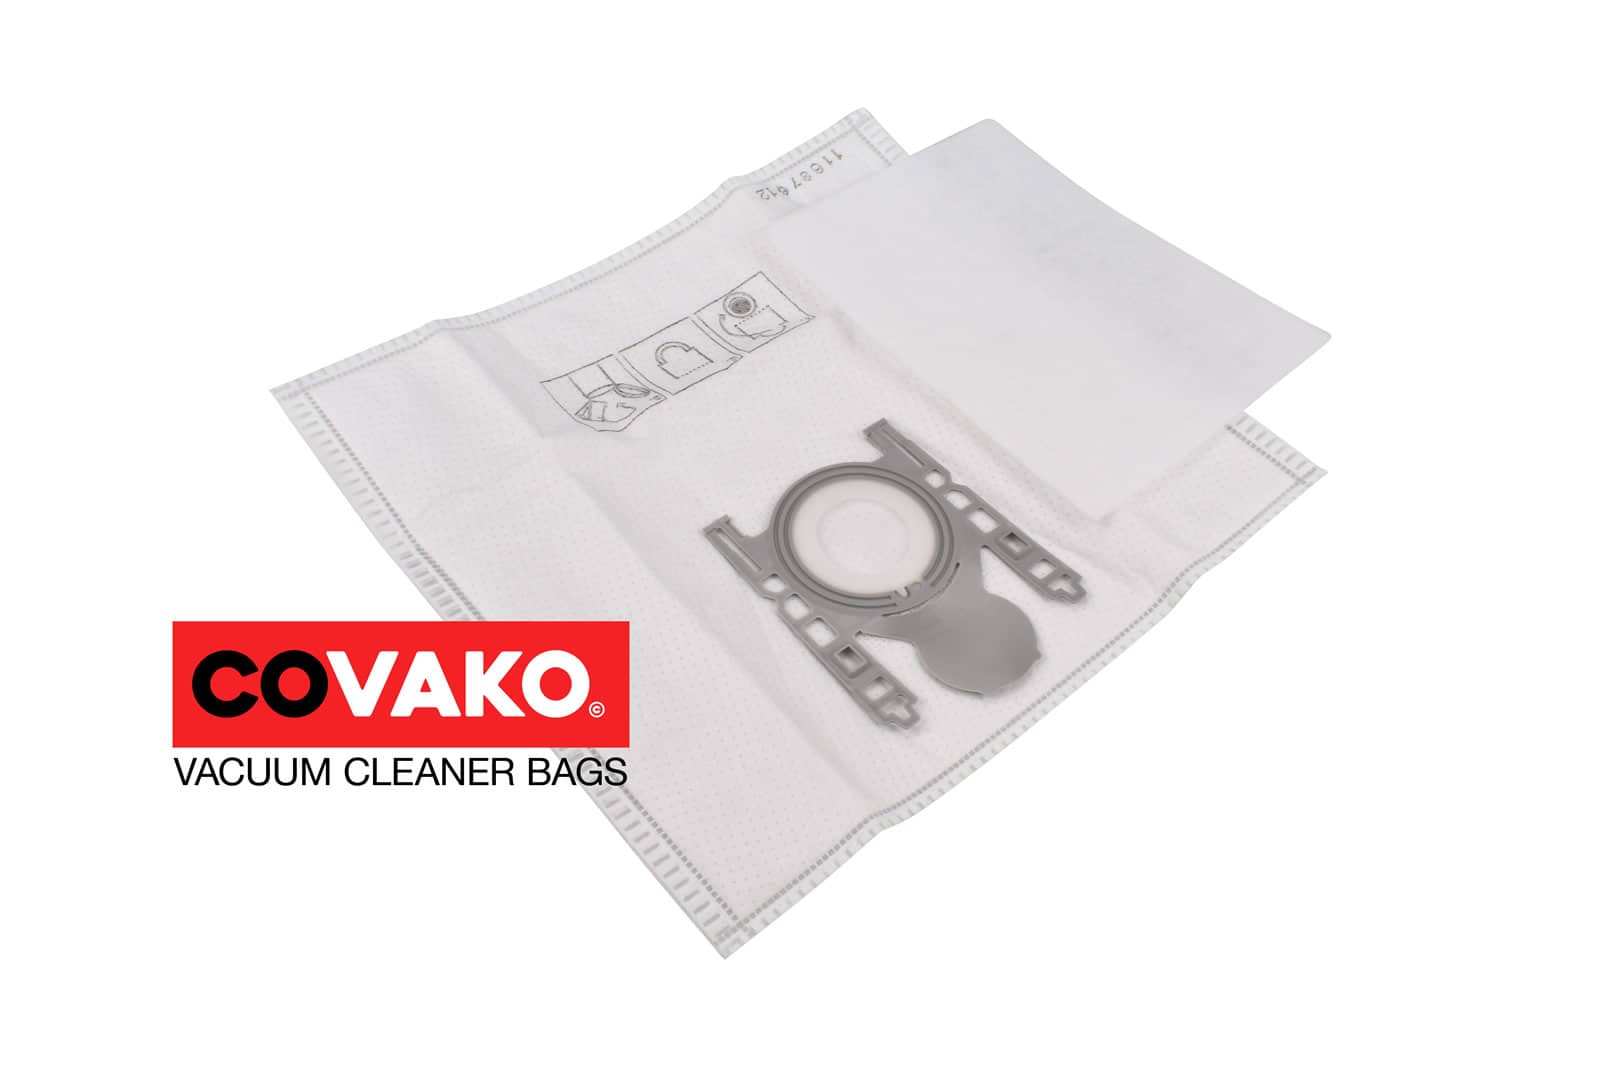 Bosch BSGL 5319 / Synthesis - Bosch vacuum cleaner bags